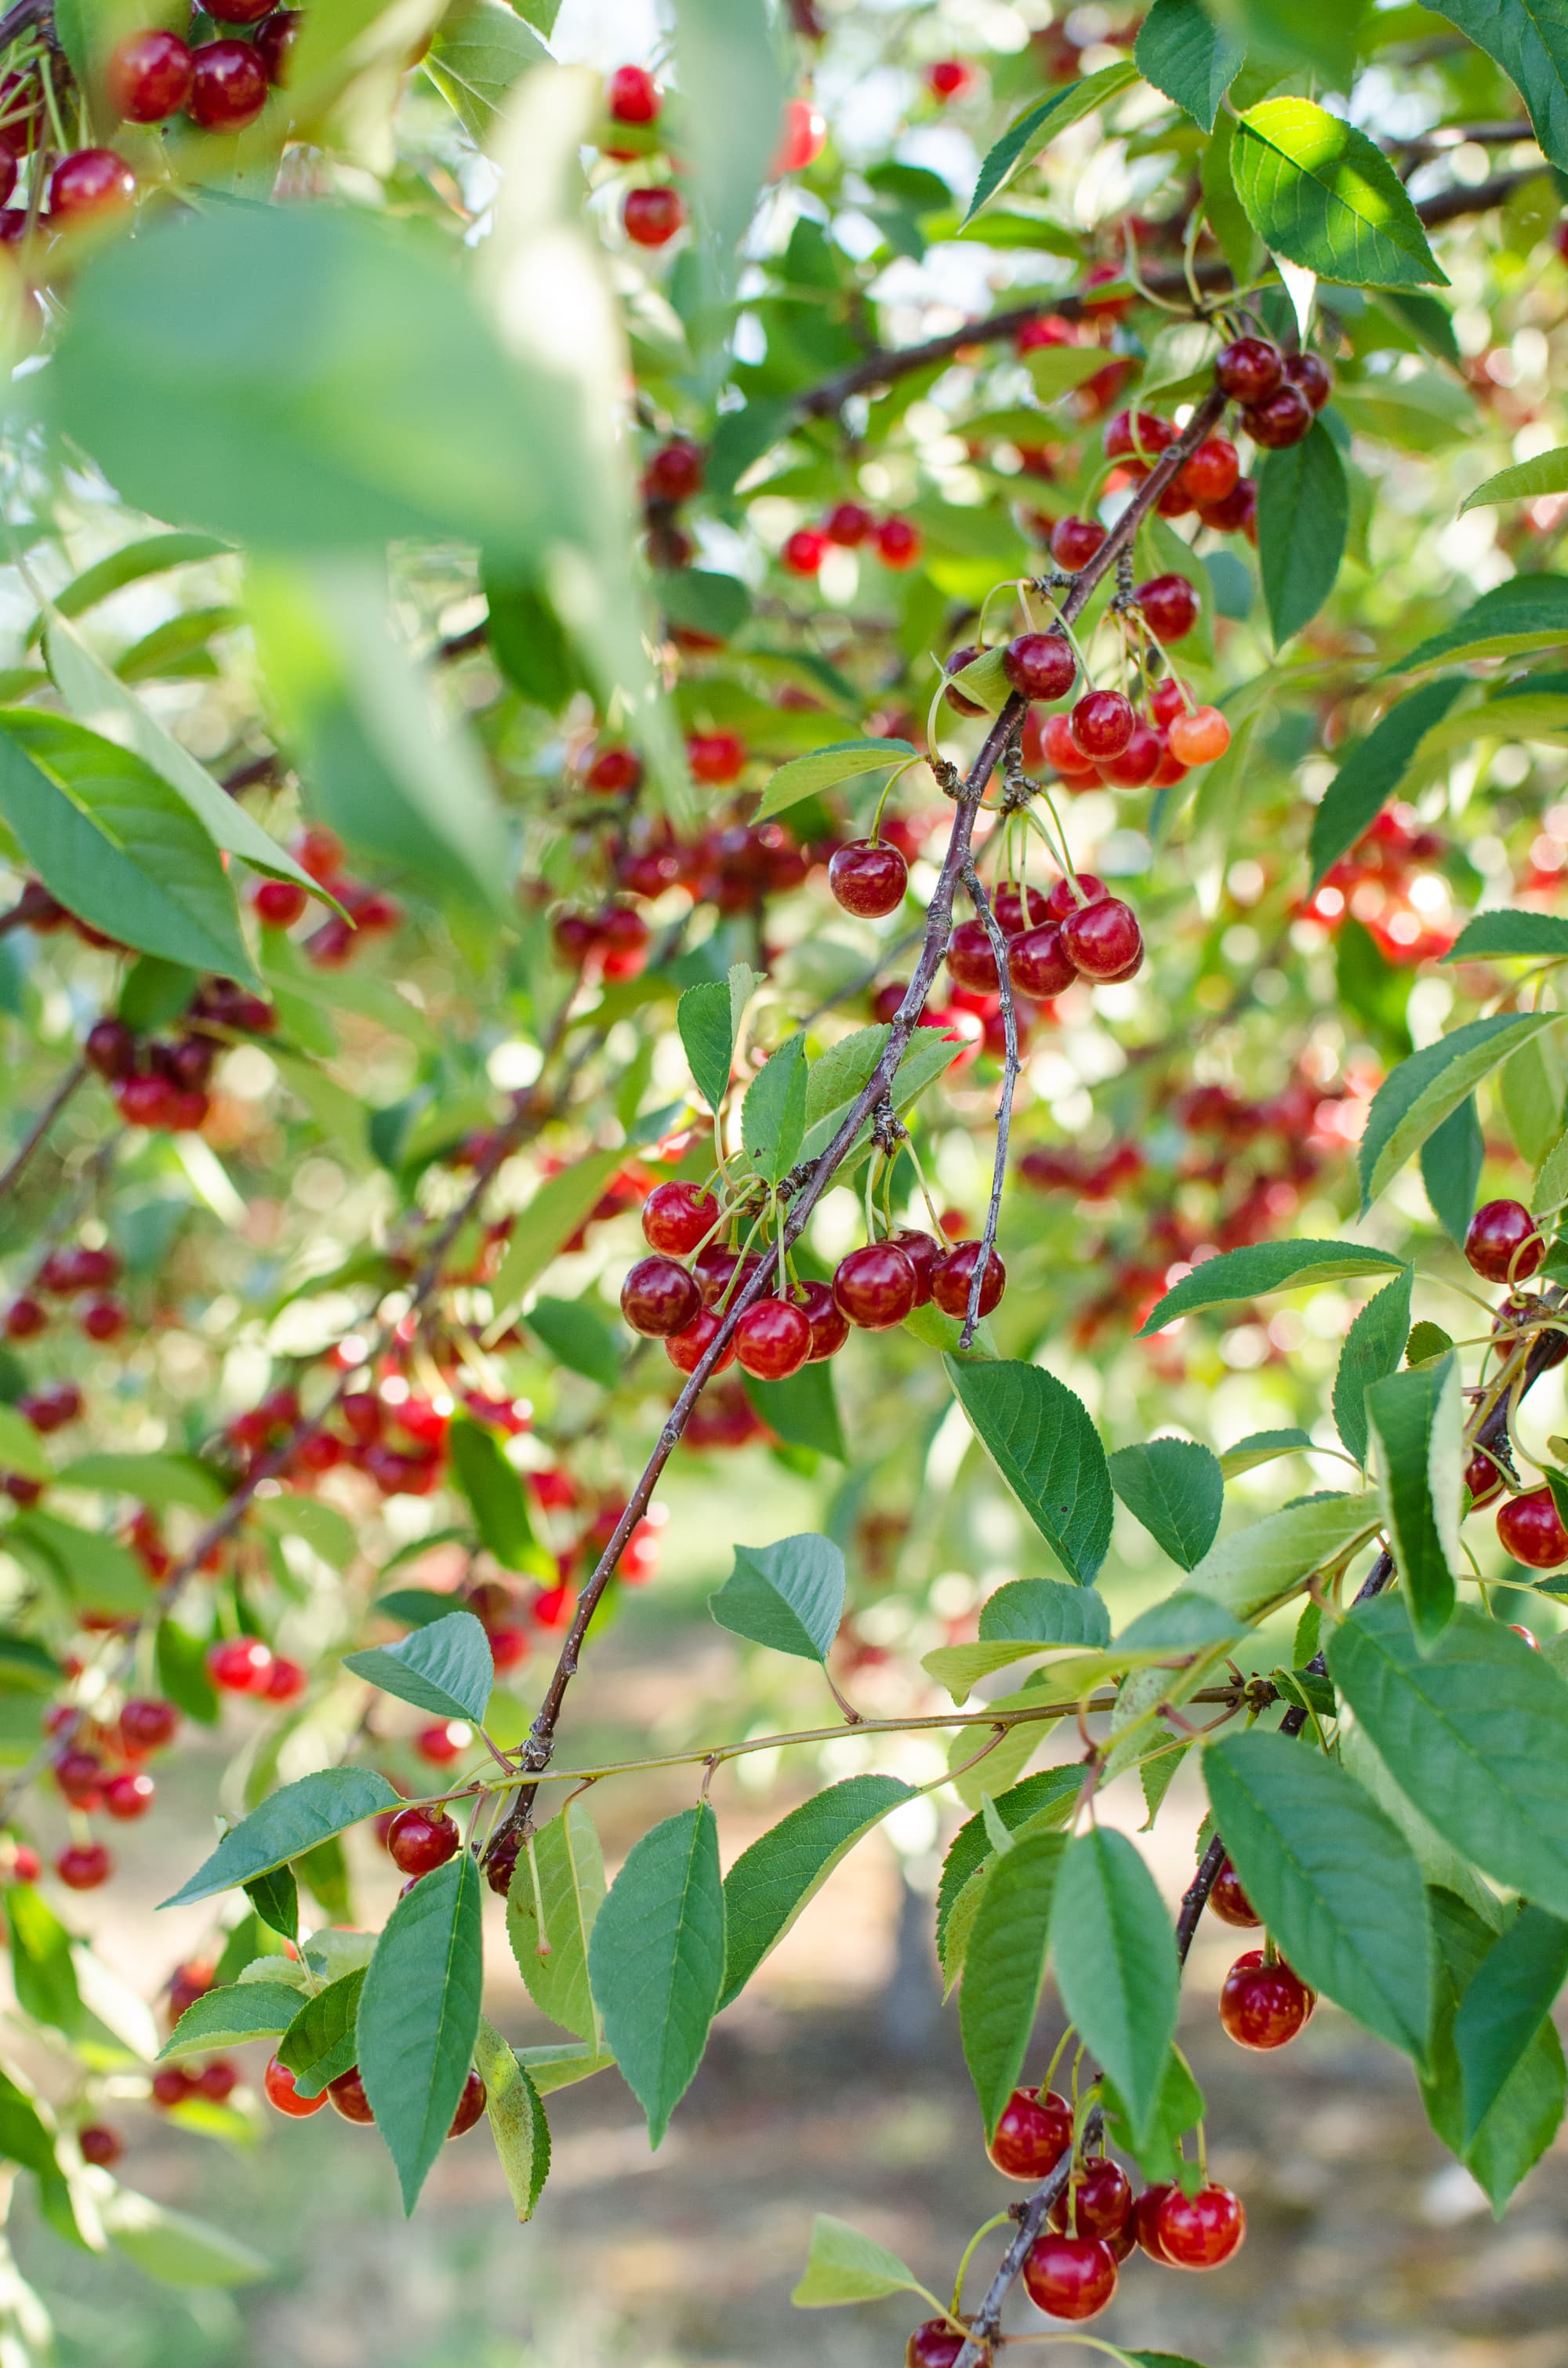 How Tart Cherries Are Grown in Michigan And Why You Should Look for